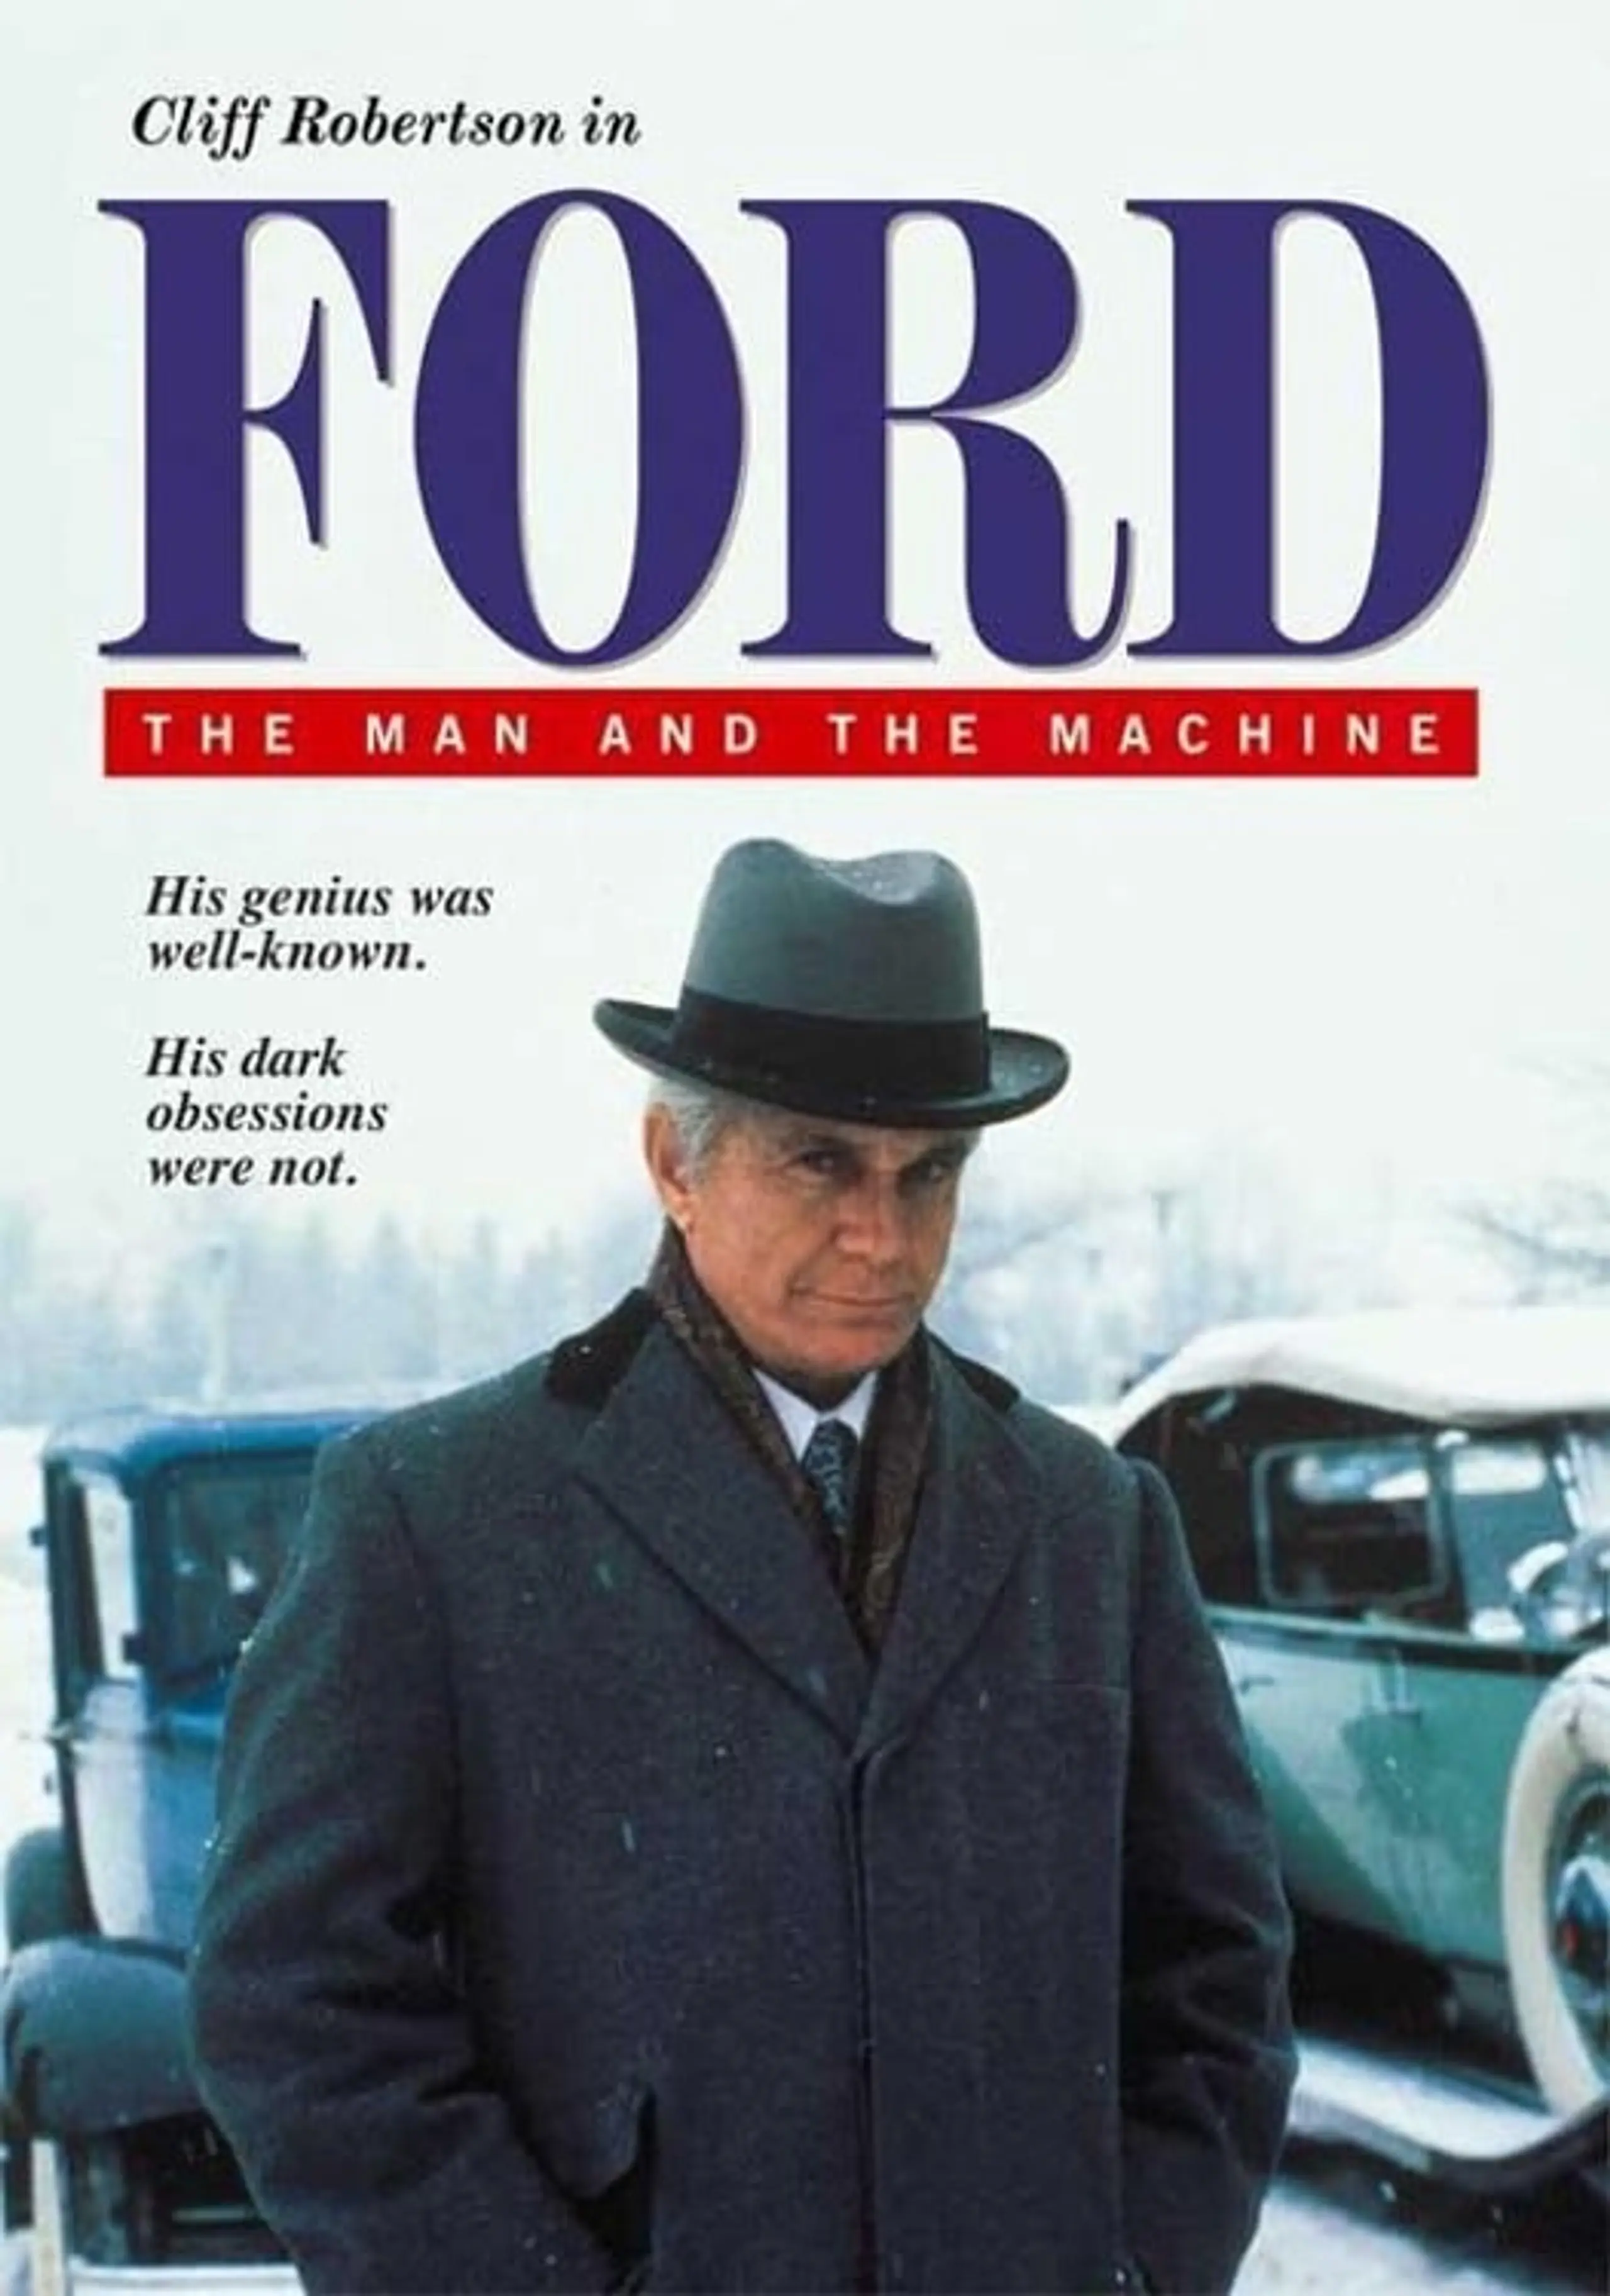 Ford: The Man and the Machine